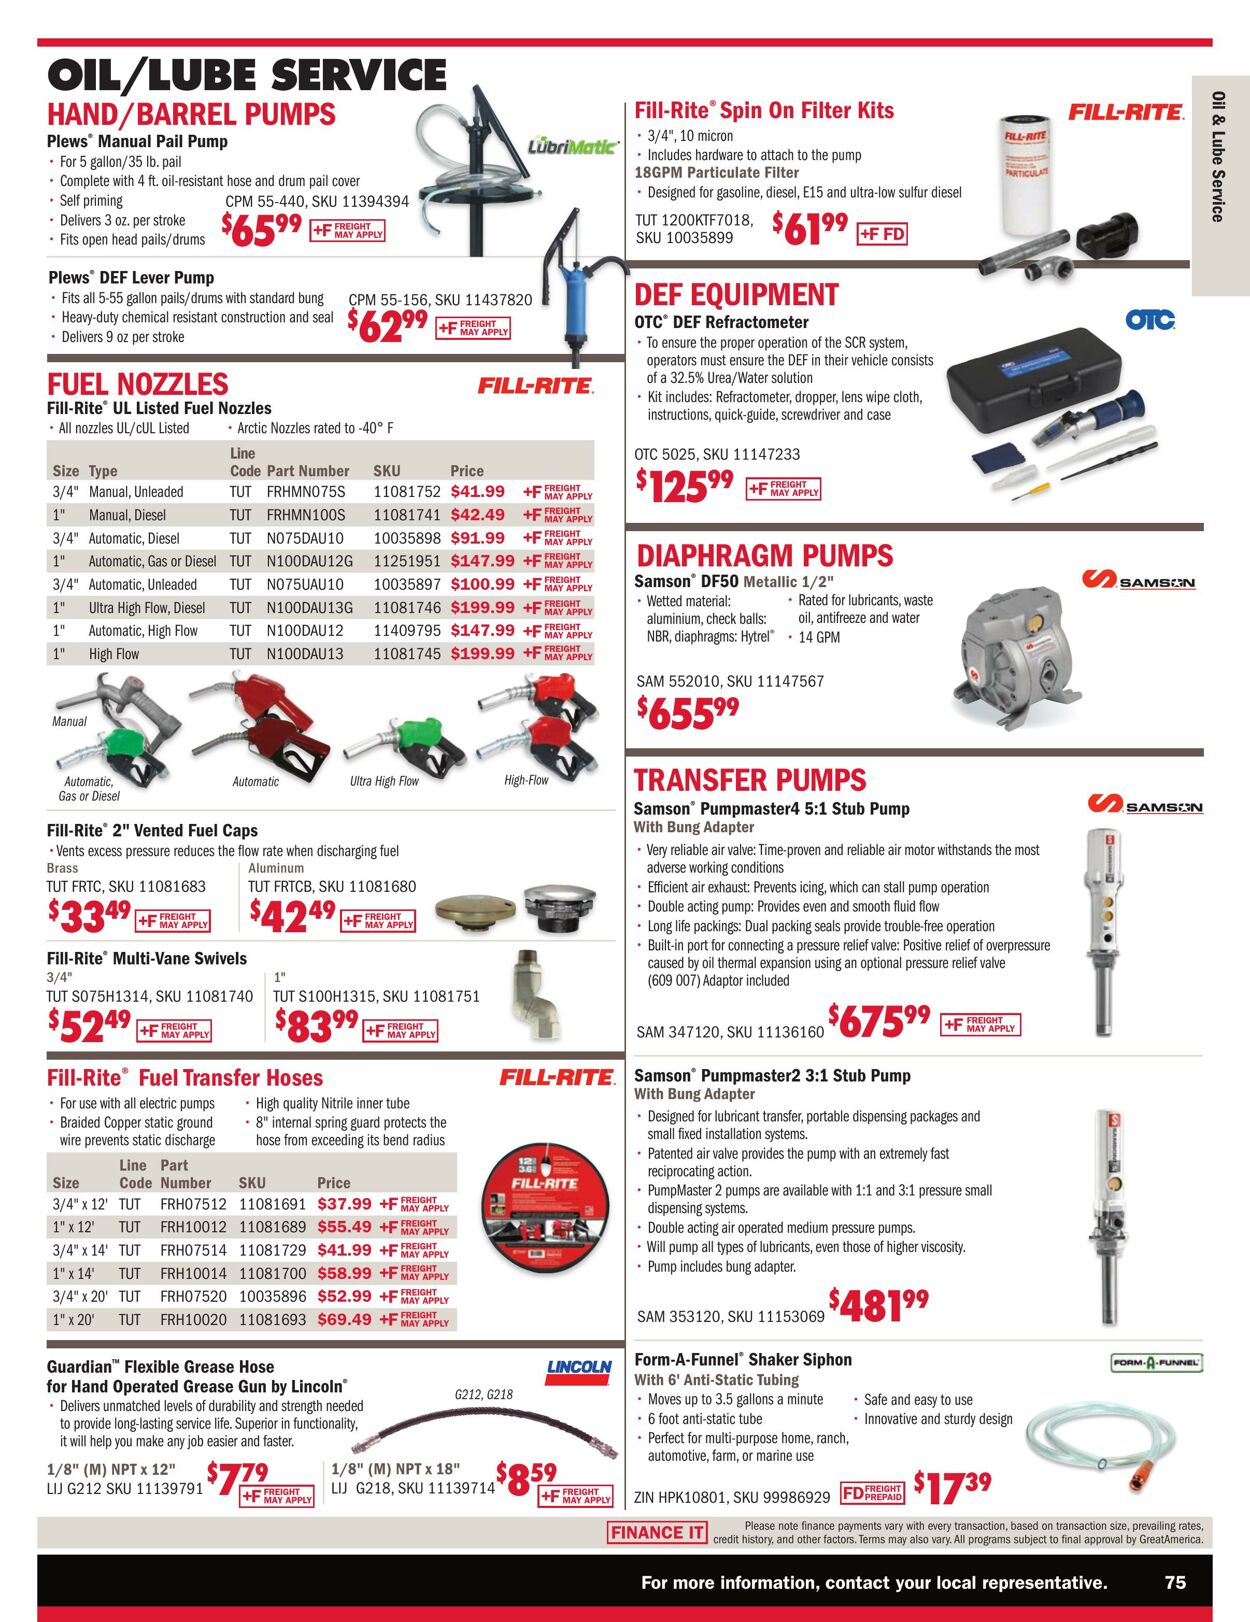 Weekly ad CarQuest 07/03/2022 - 10/01/2022